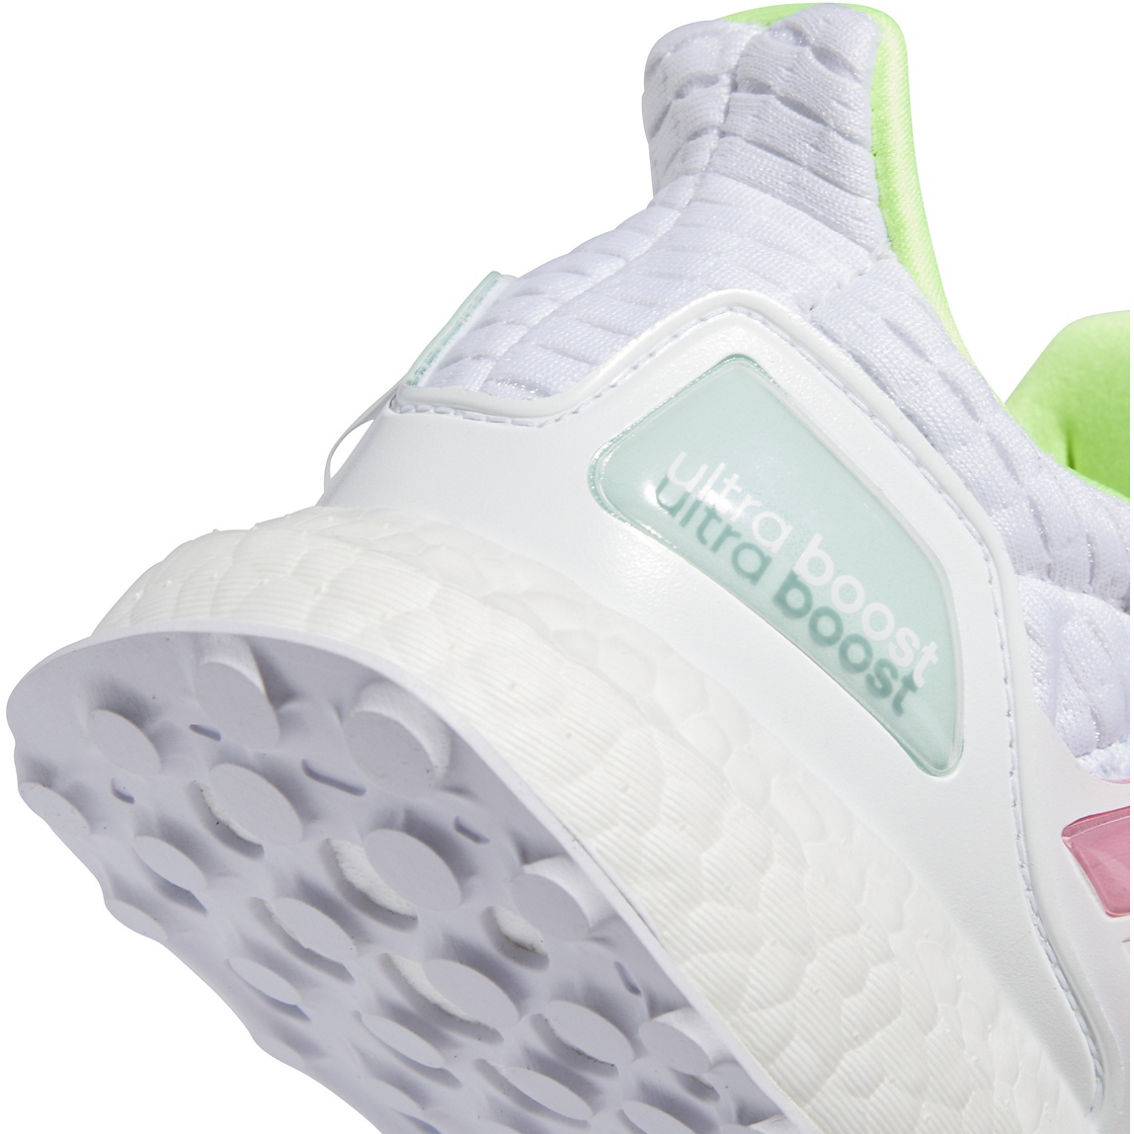 adidas Women's Ultraboost 1.0 Running Shoes - Image 7 of 7